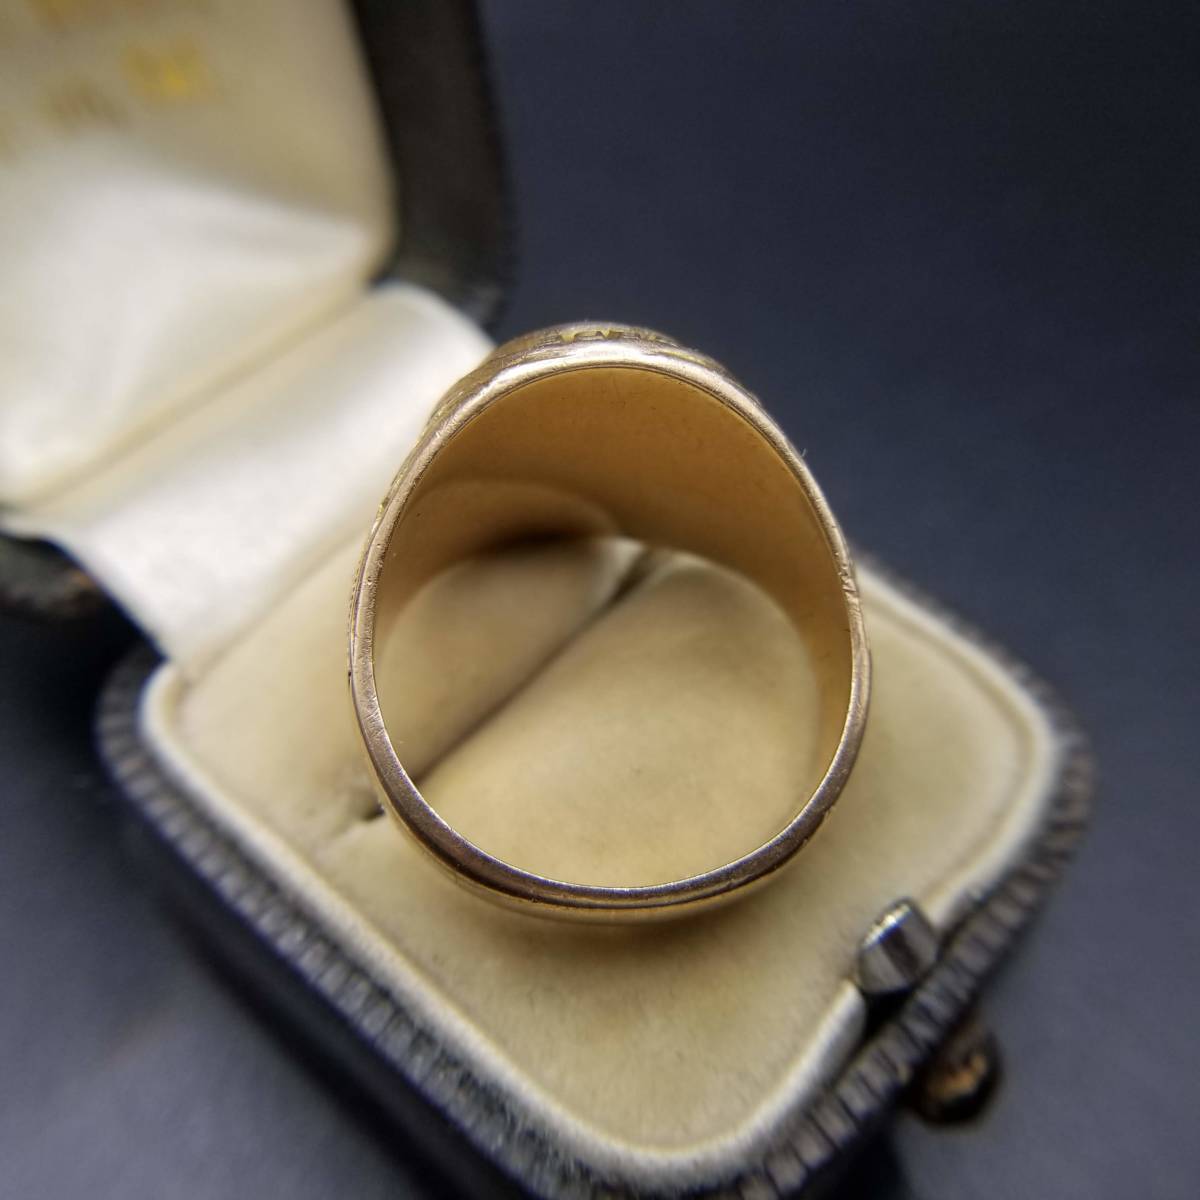 1947 year American kla sling MURCHISON NEWARK Vintage K10 yellow gold onyx triangle engraving ring gold worcester Y5-A